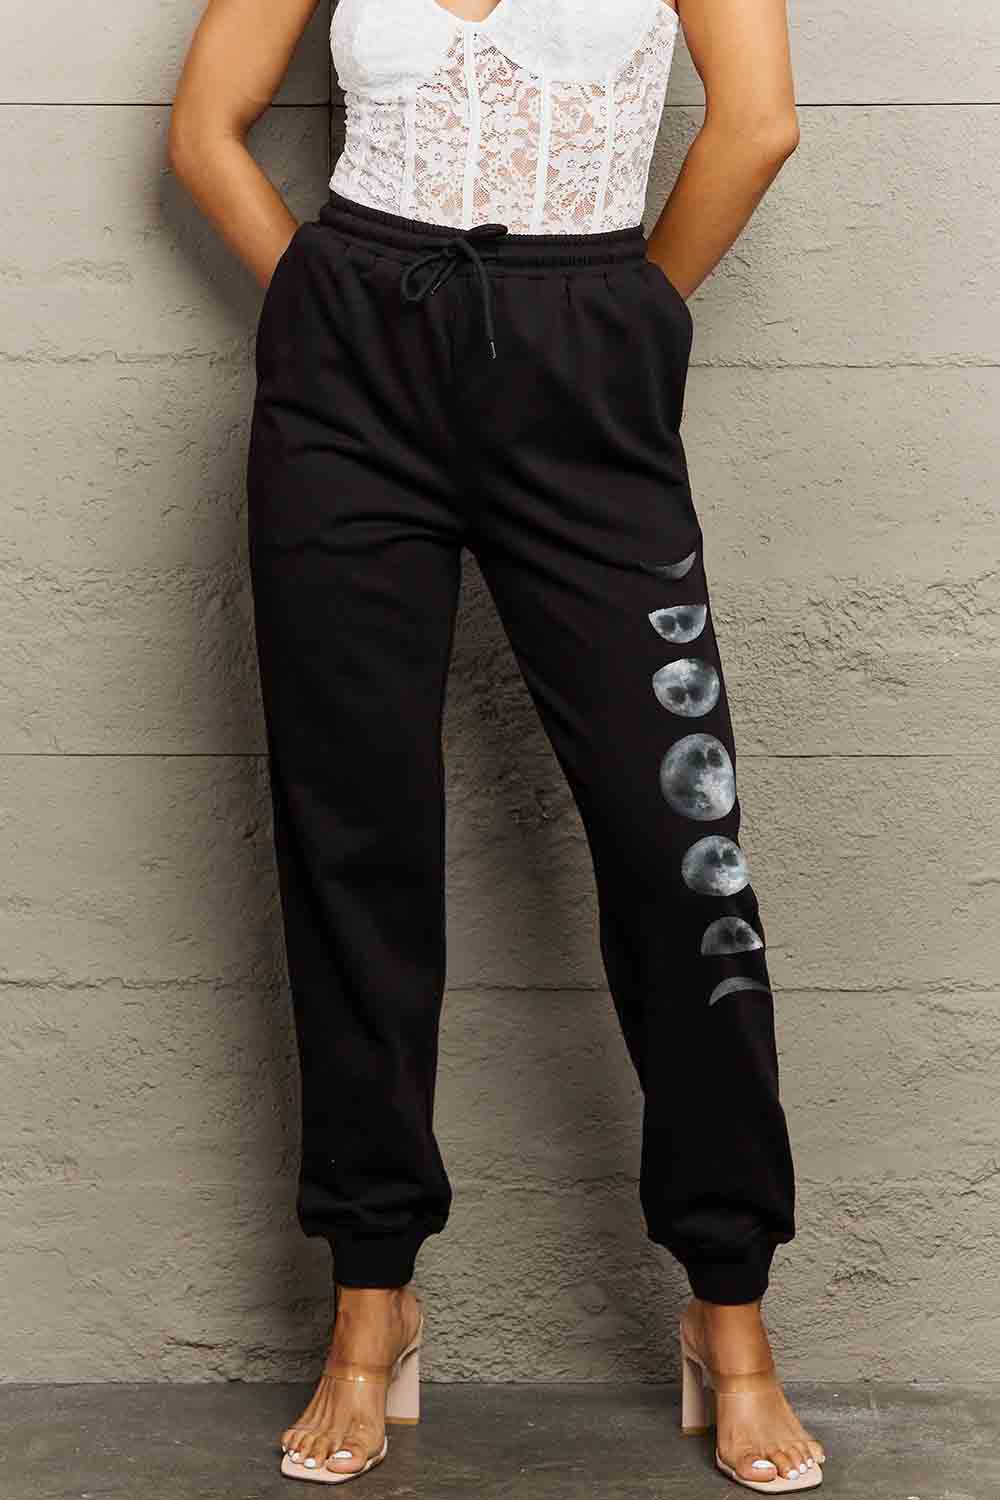 Simply Love Full Size Lunar Phase Graphic Sweatpants